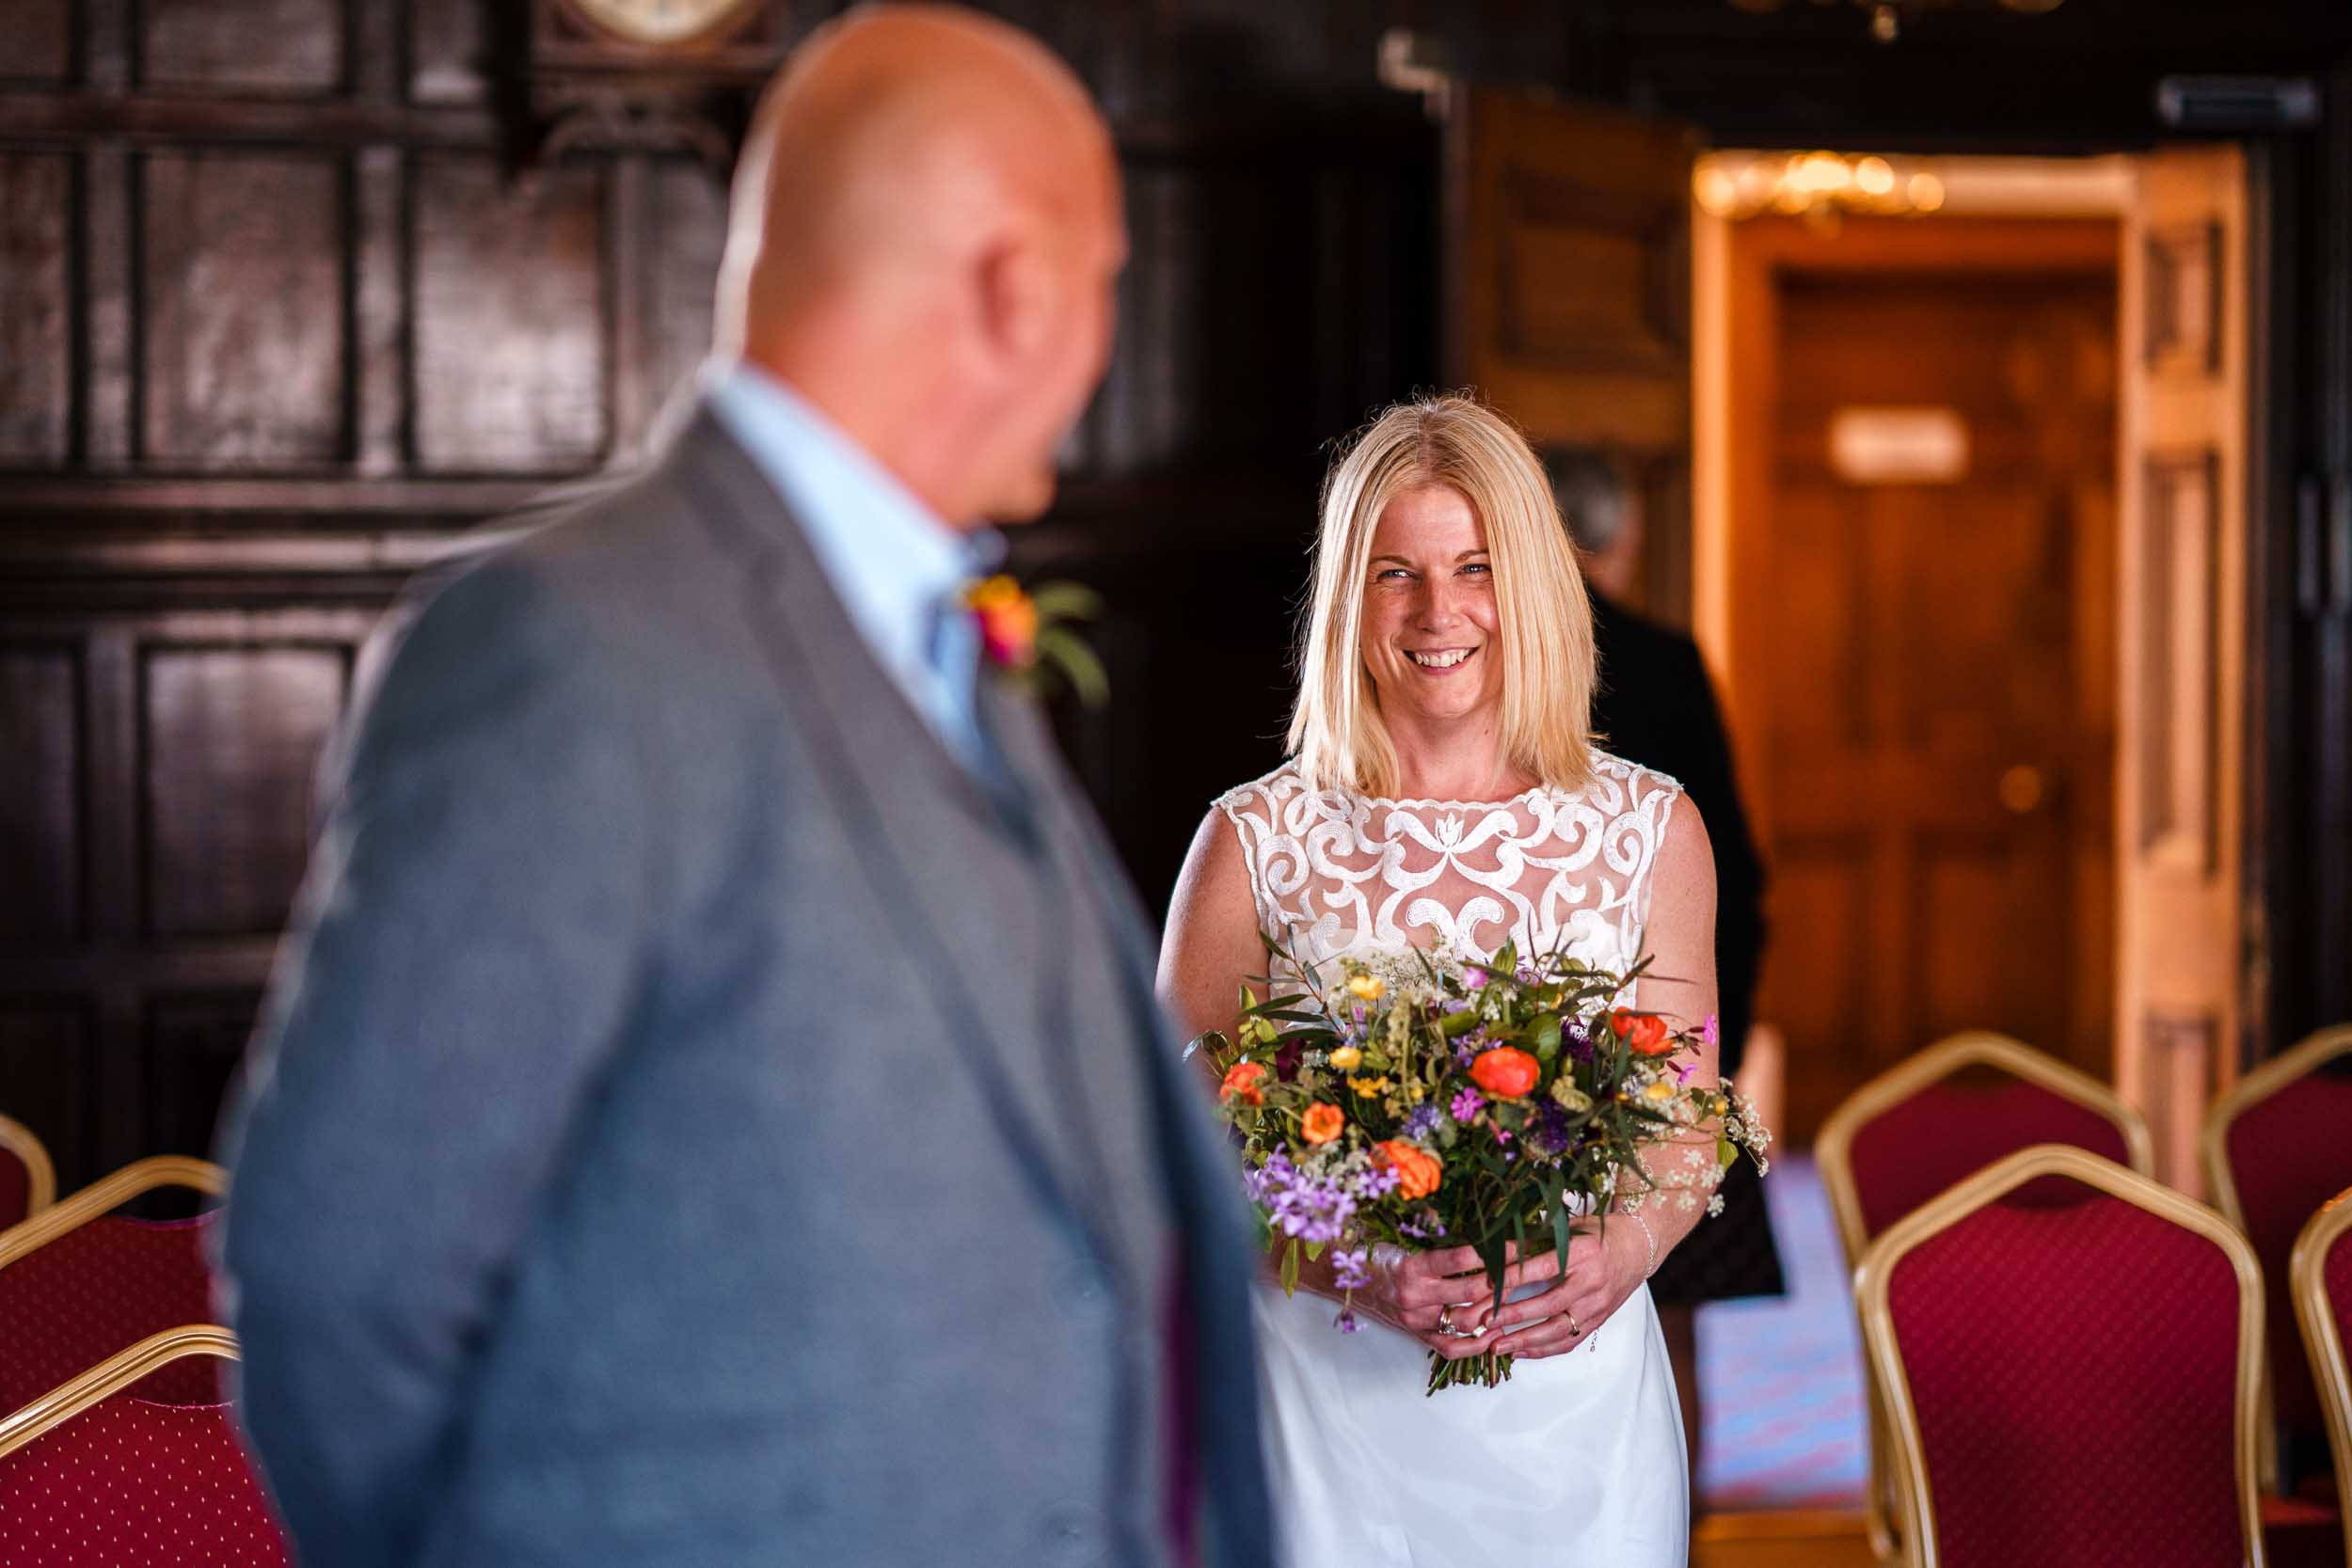 Herefordshire Wedding Photography, Wedding in Hereford